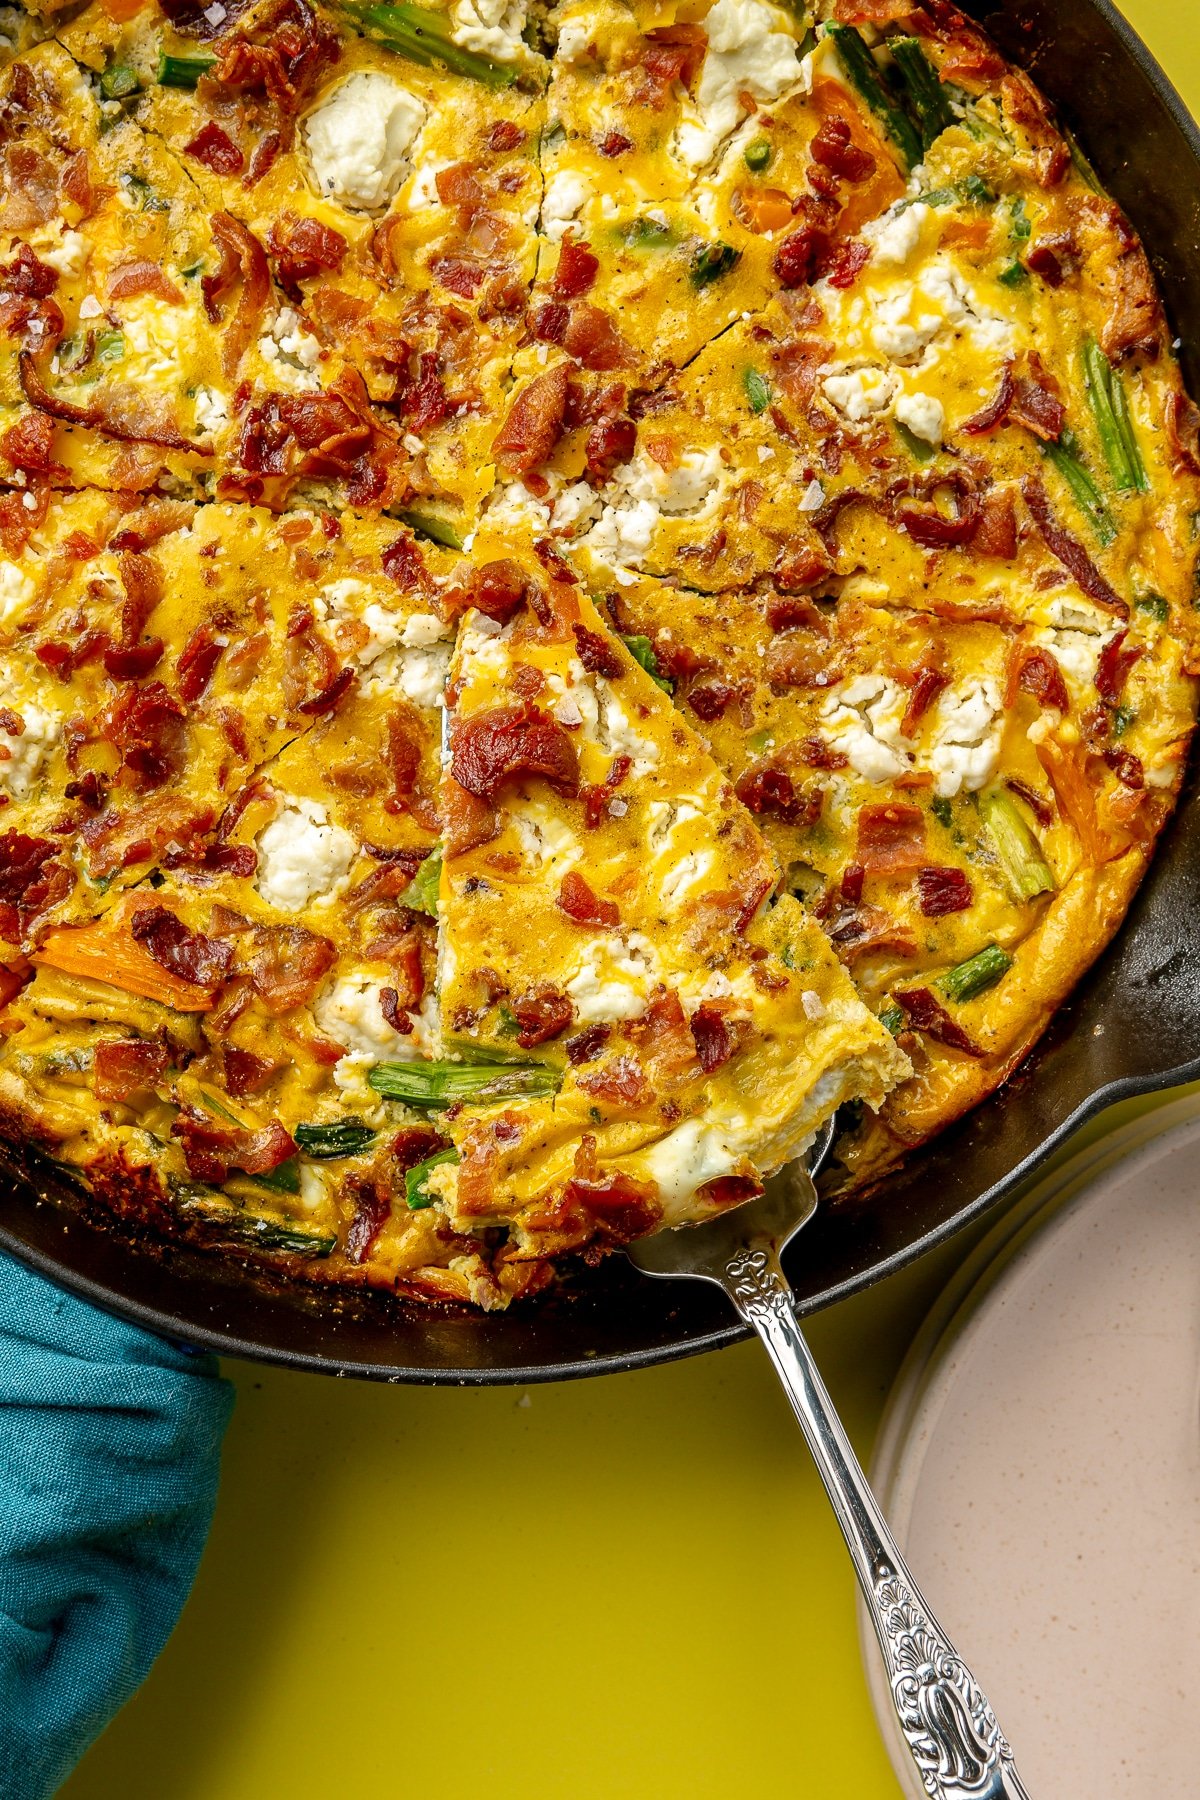 Now fully cooked frittata has been cut into triangular pieces. One piece is shown being removed from the skillet with a silver spatula.